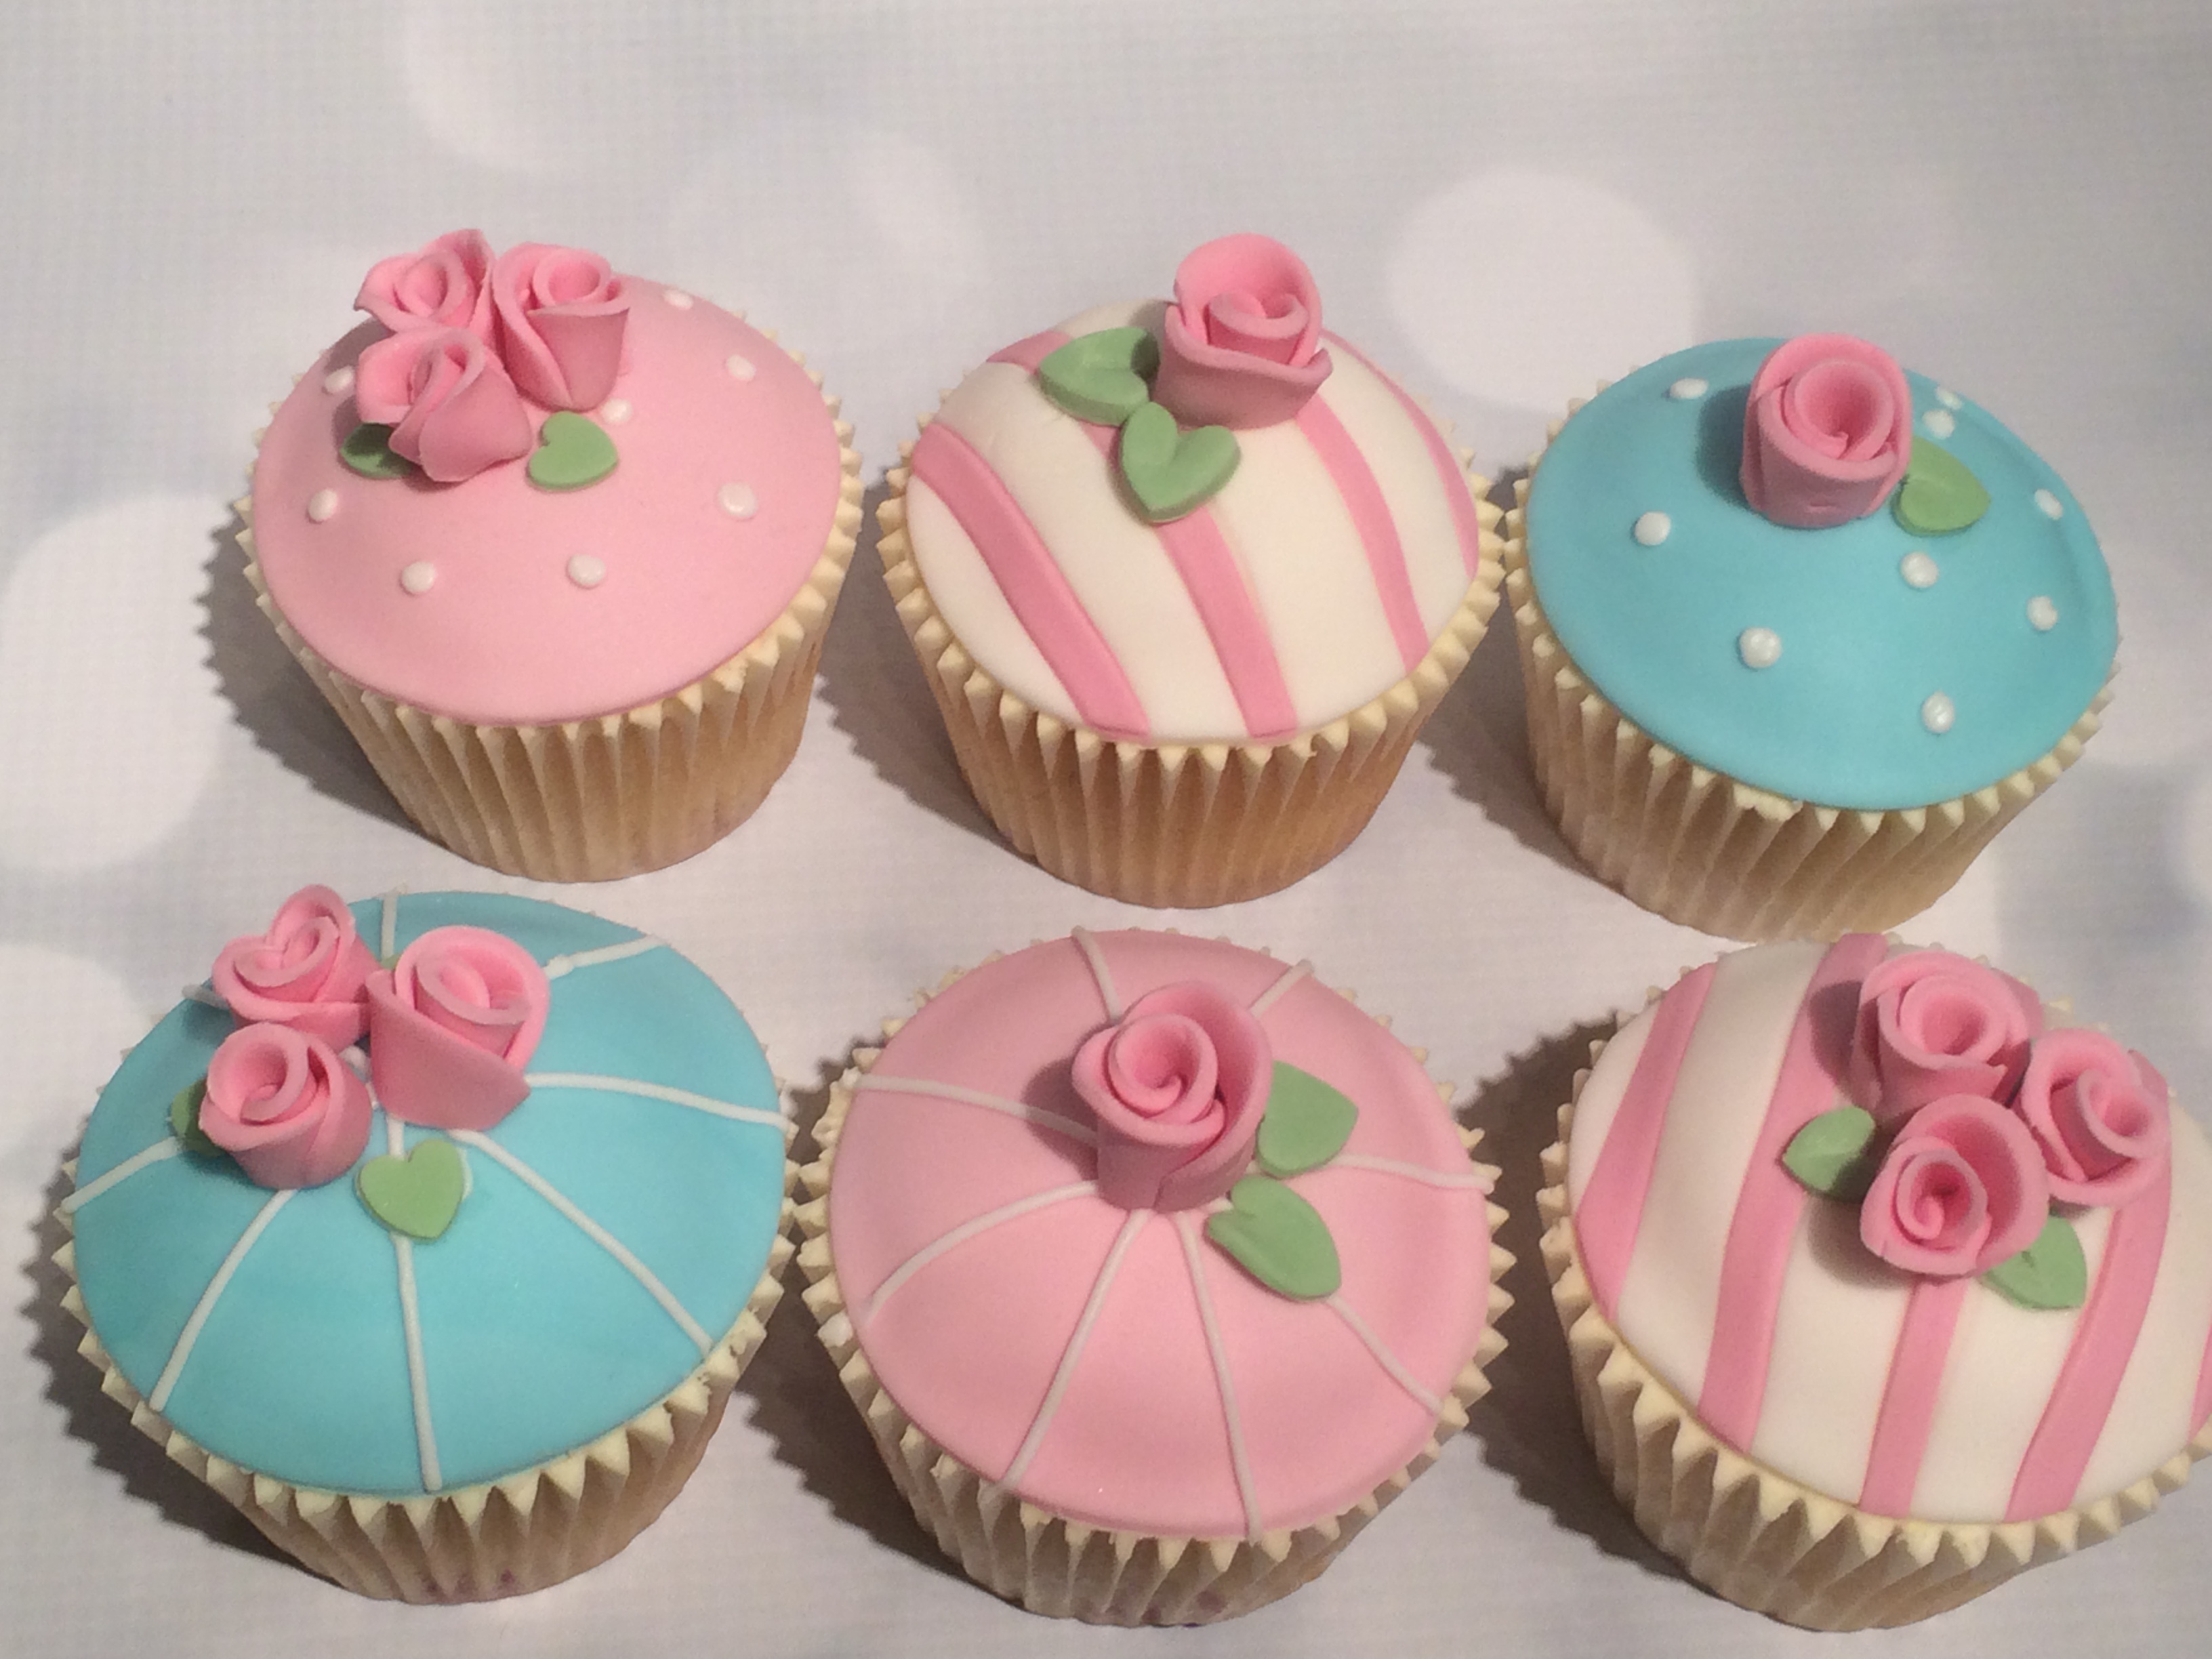 Cupcakes with Fondant Roses